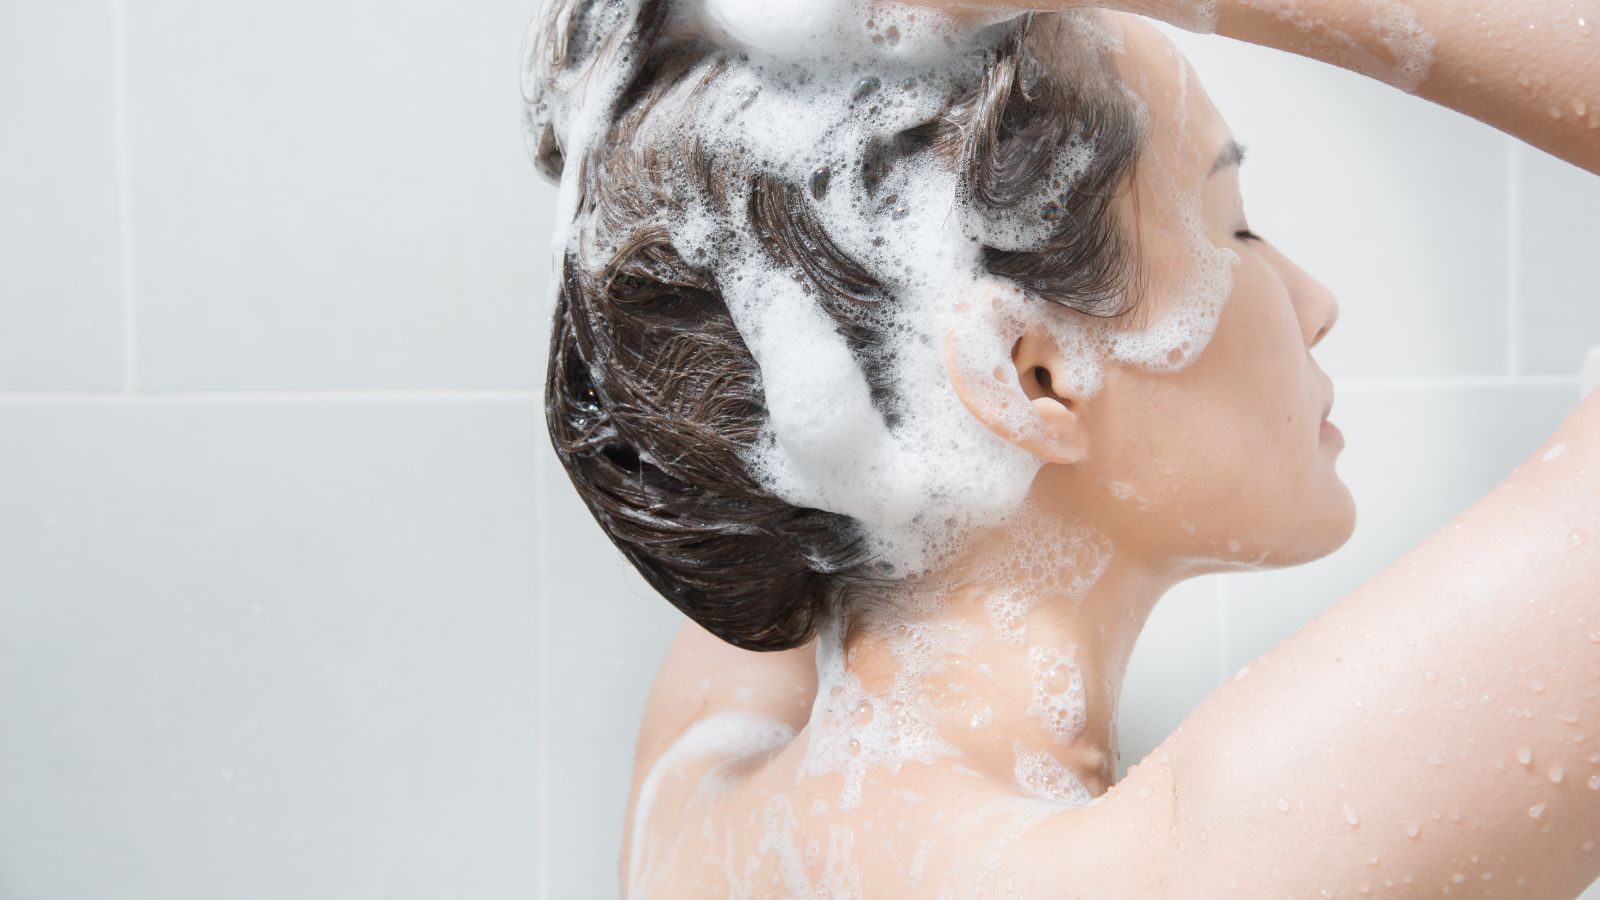 Woman in the shower washing hair with shampoo.